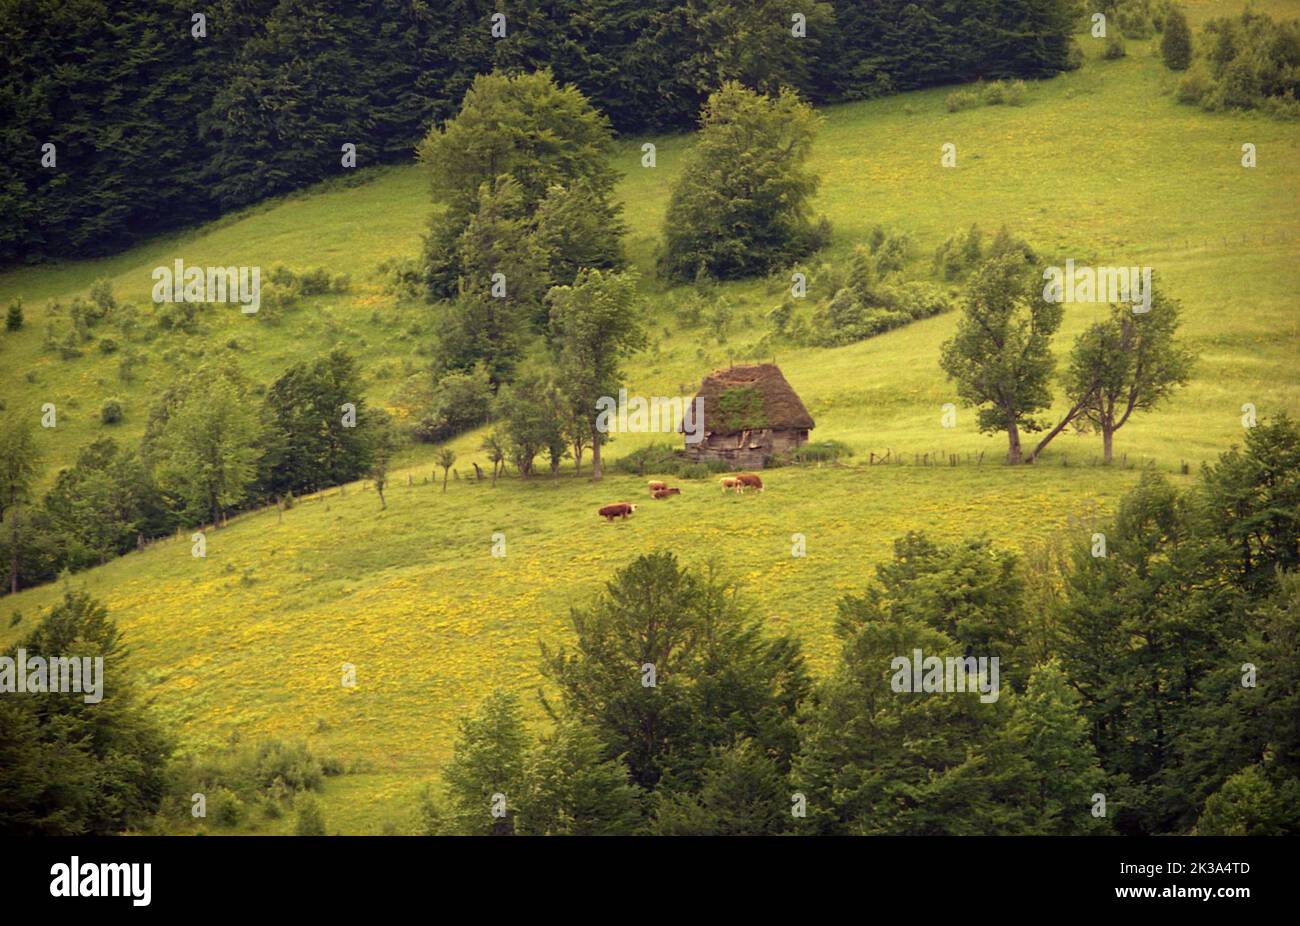 Poșaga, Alba County, Romania, approx. 1999. Pasture in the Apuseni Mountains, with cows grazing by a traditional thatched straw roof shed. Stock Photo